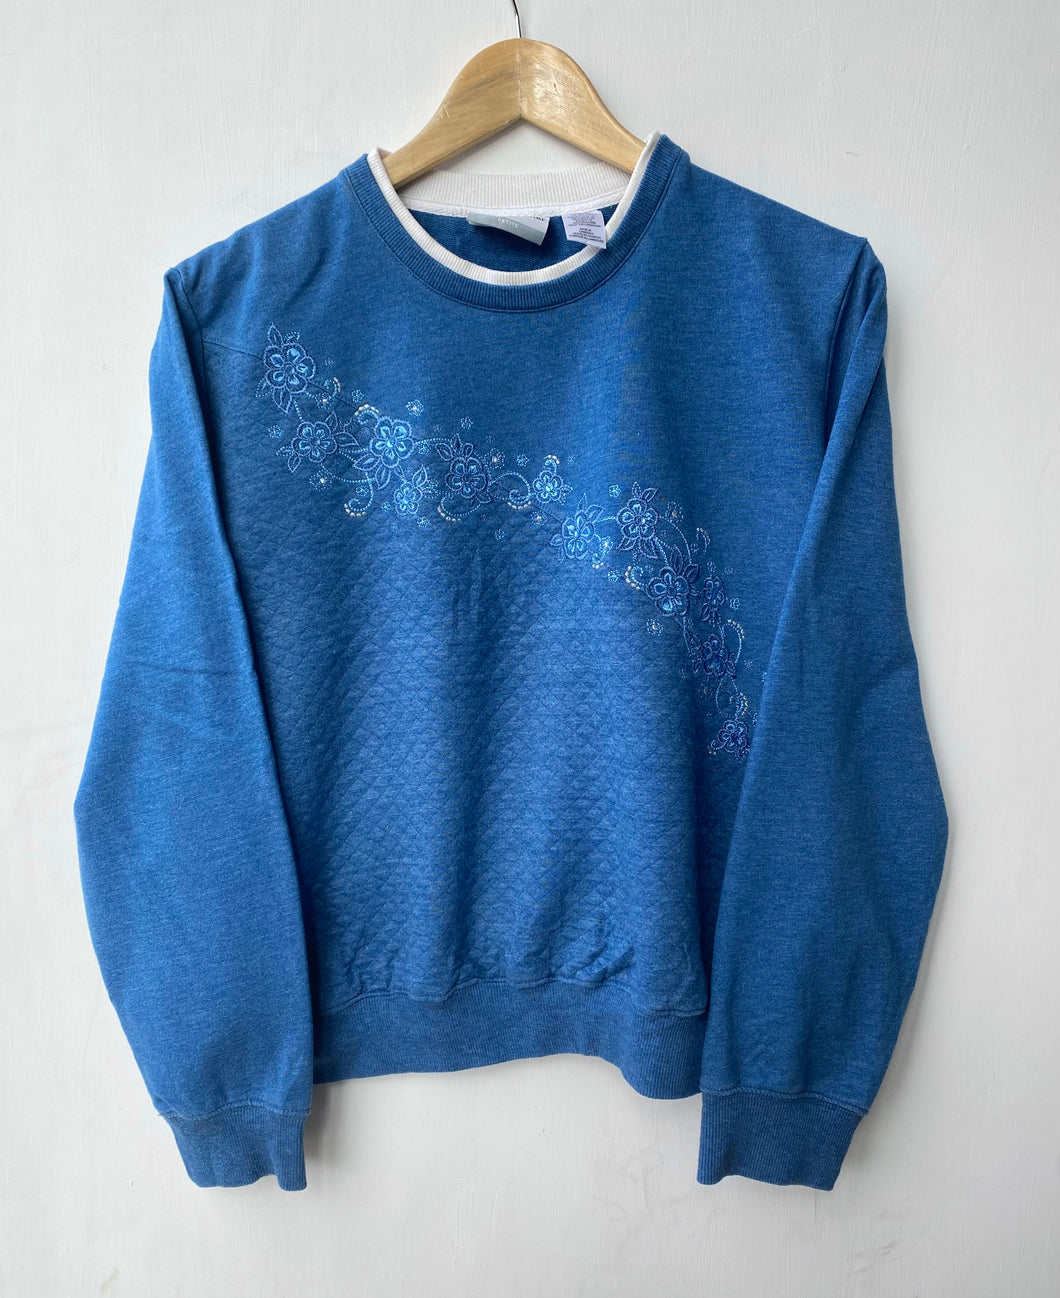 Embroidered ‘Floral’ sweatshirt (S)